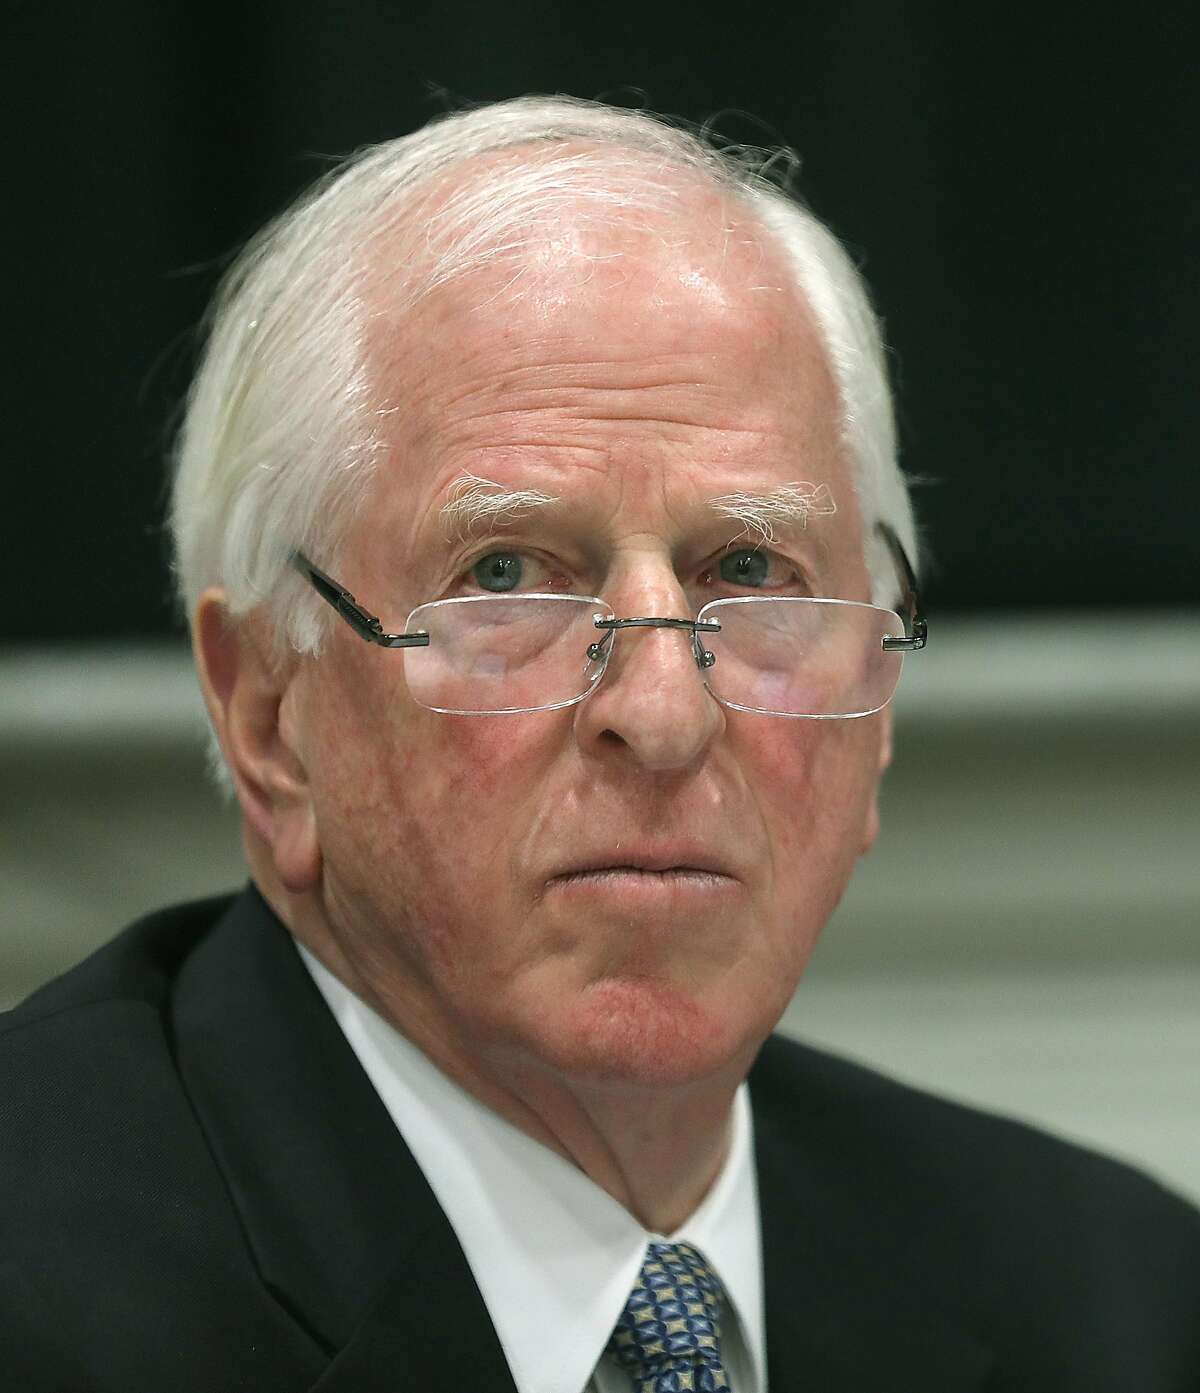 Congressman Mike Thompson pauses before speaking at a community meeting for north bay fire victims at Veterans Memorial Auditorium on Wednesday, Feb. 20, 2019, in Santa Rosa, Calif. Rep. Mike Thompson leads much of the House Democrats' renewed charge for gun-control measures.